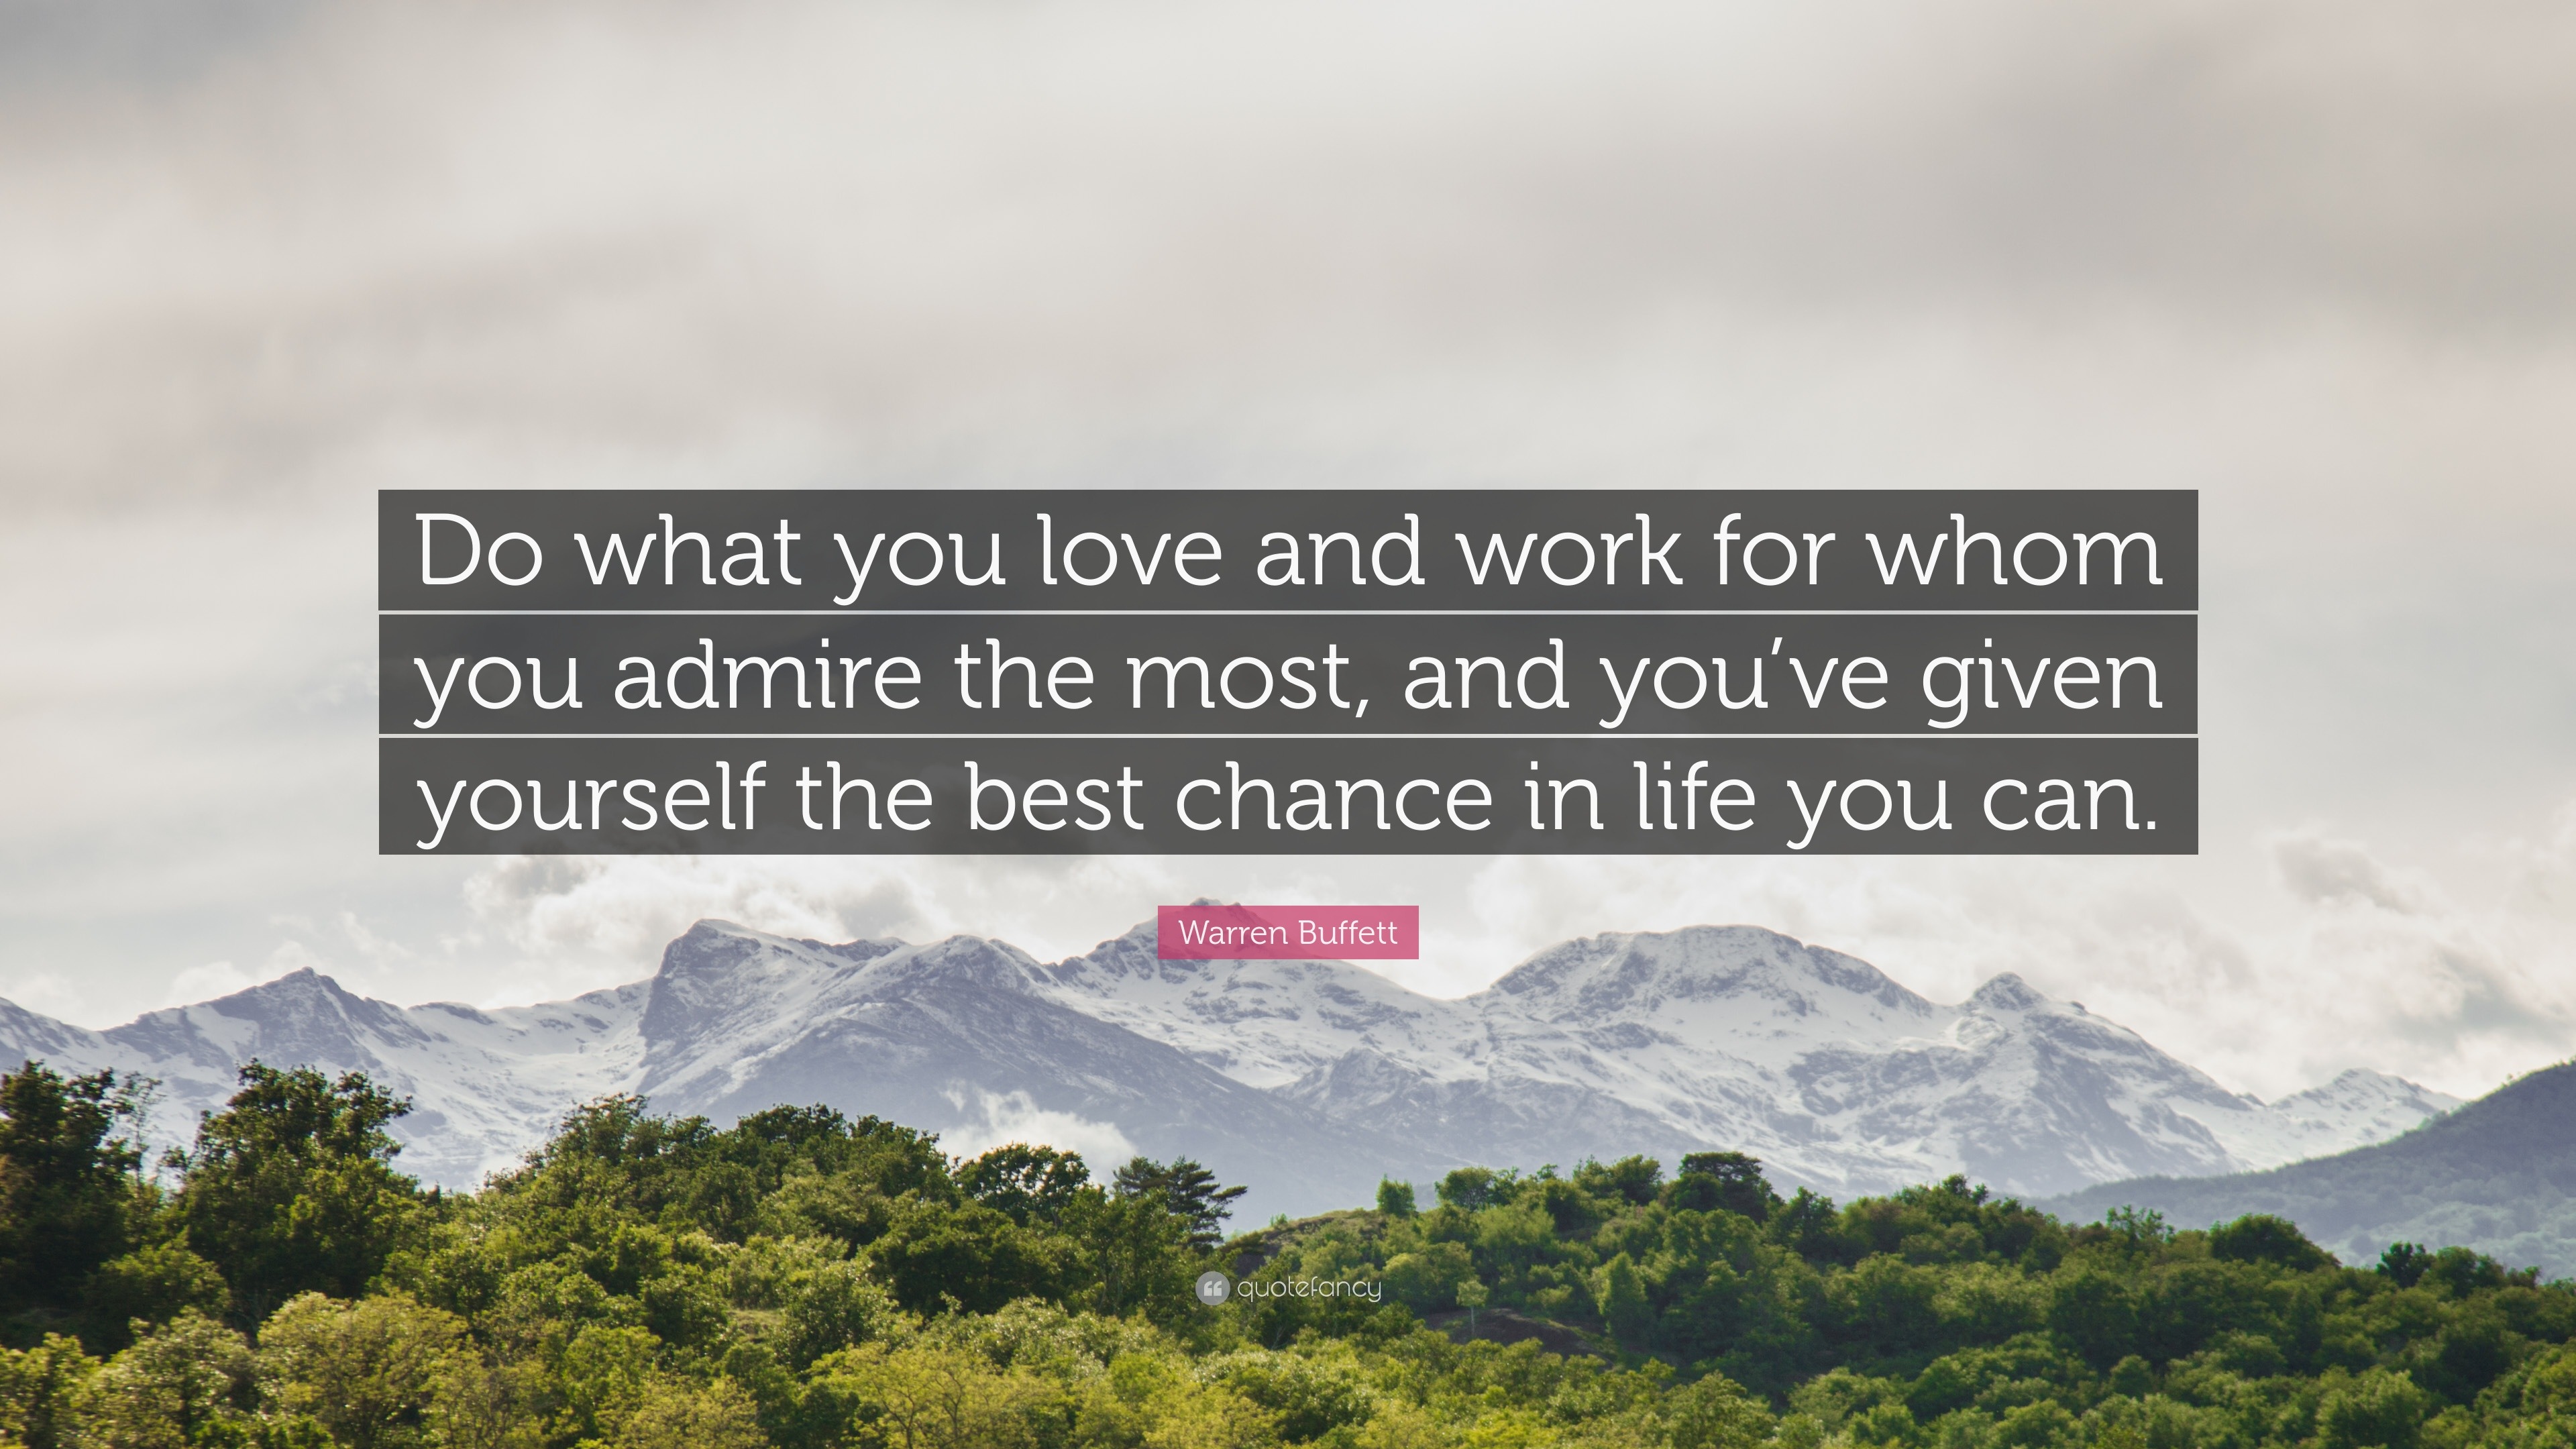 Warren Buffett Quote Do What You Love And Work For Whom You Admire The Most And